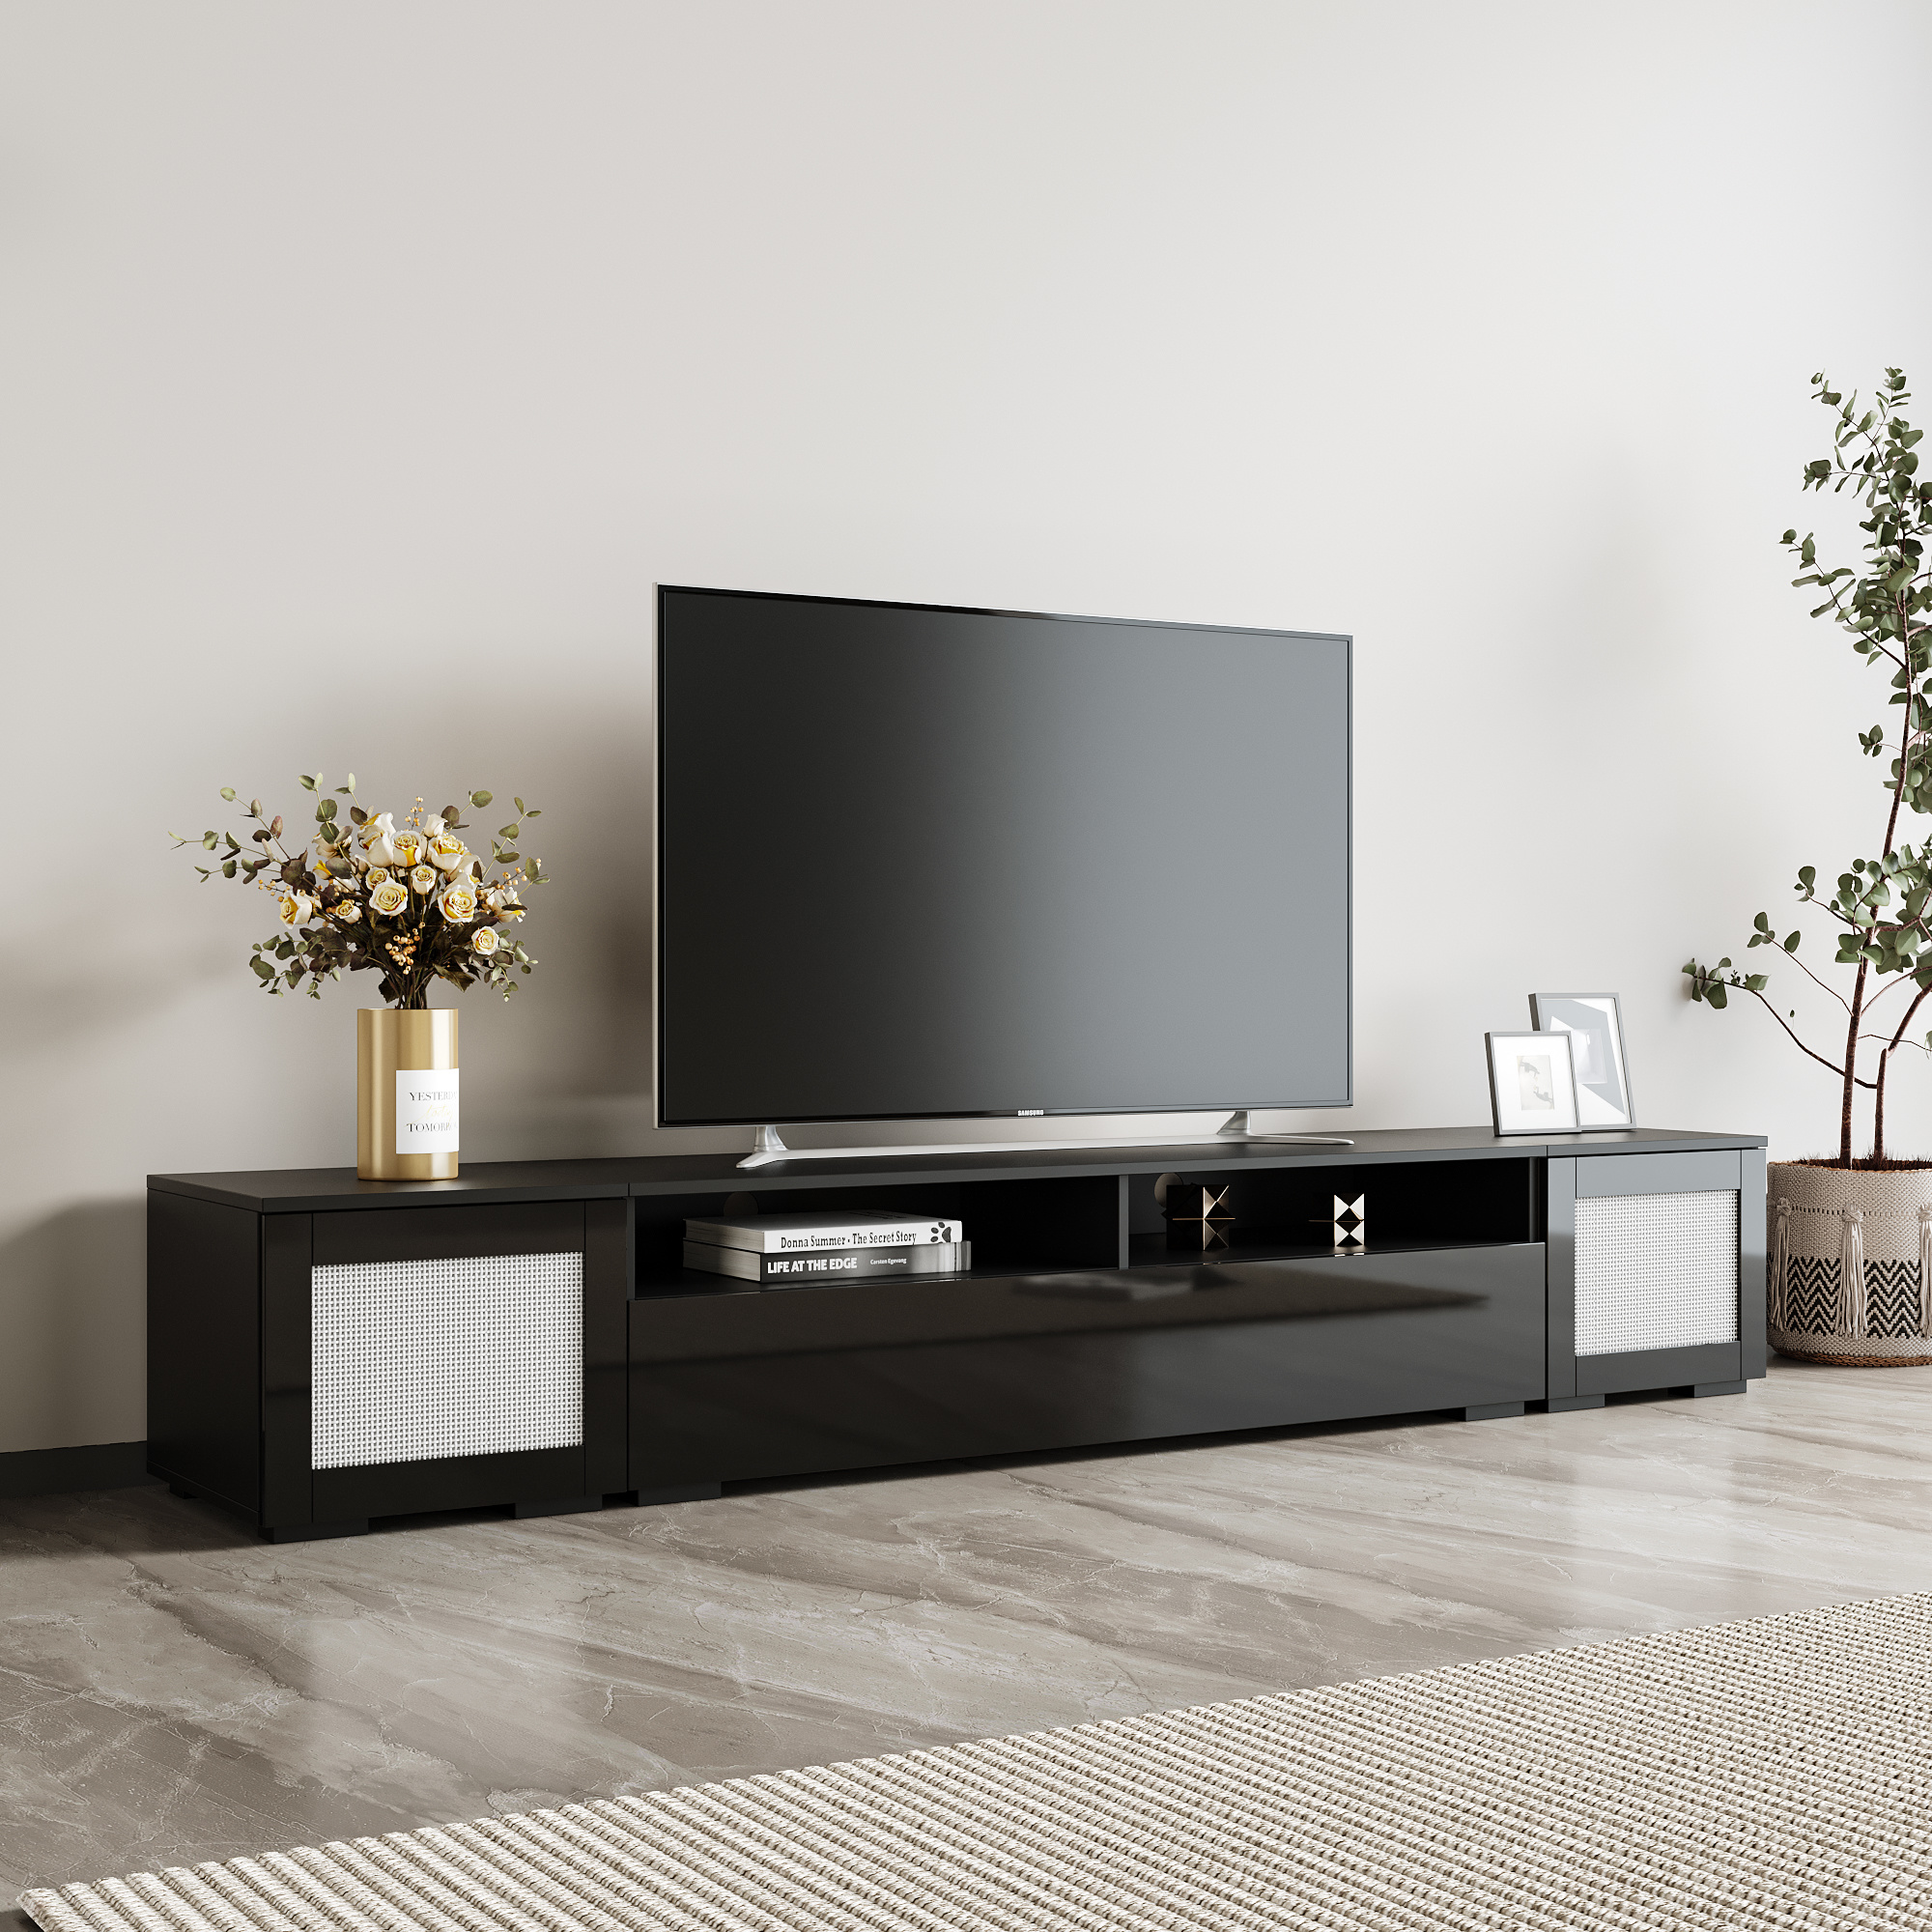 ON-TREND Rattan Style Entertainment Center with Push to Open Doors, 3-pics Extended TV Console Table